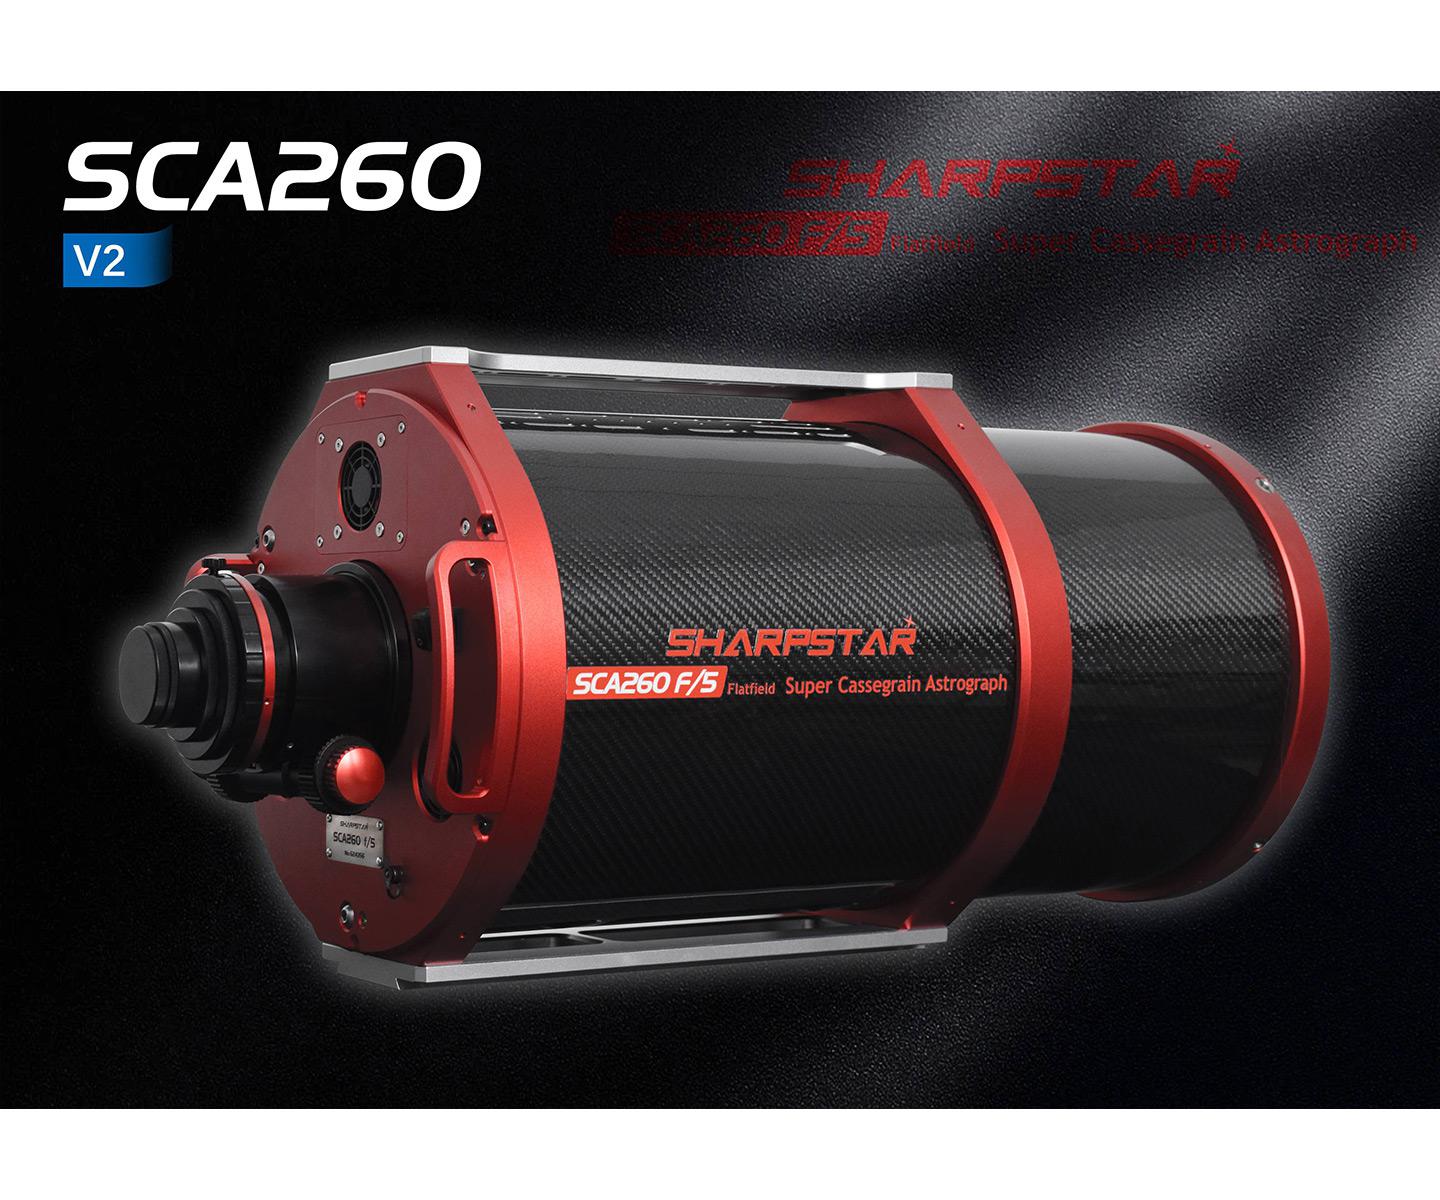  The Sharpstar SCA 260 Aspherical Cassegrain Astrograph is optimized for astrophotography with large sensors and high resolution. [EN] 